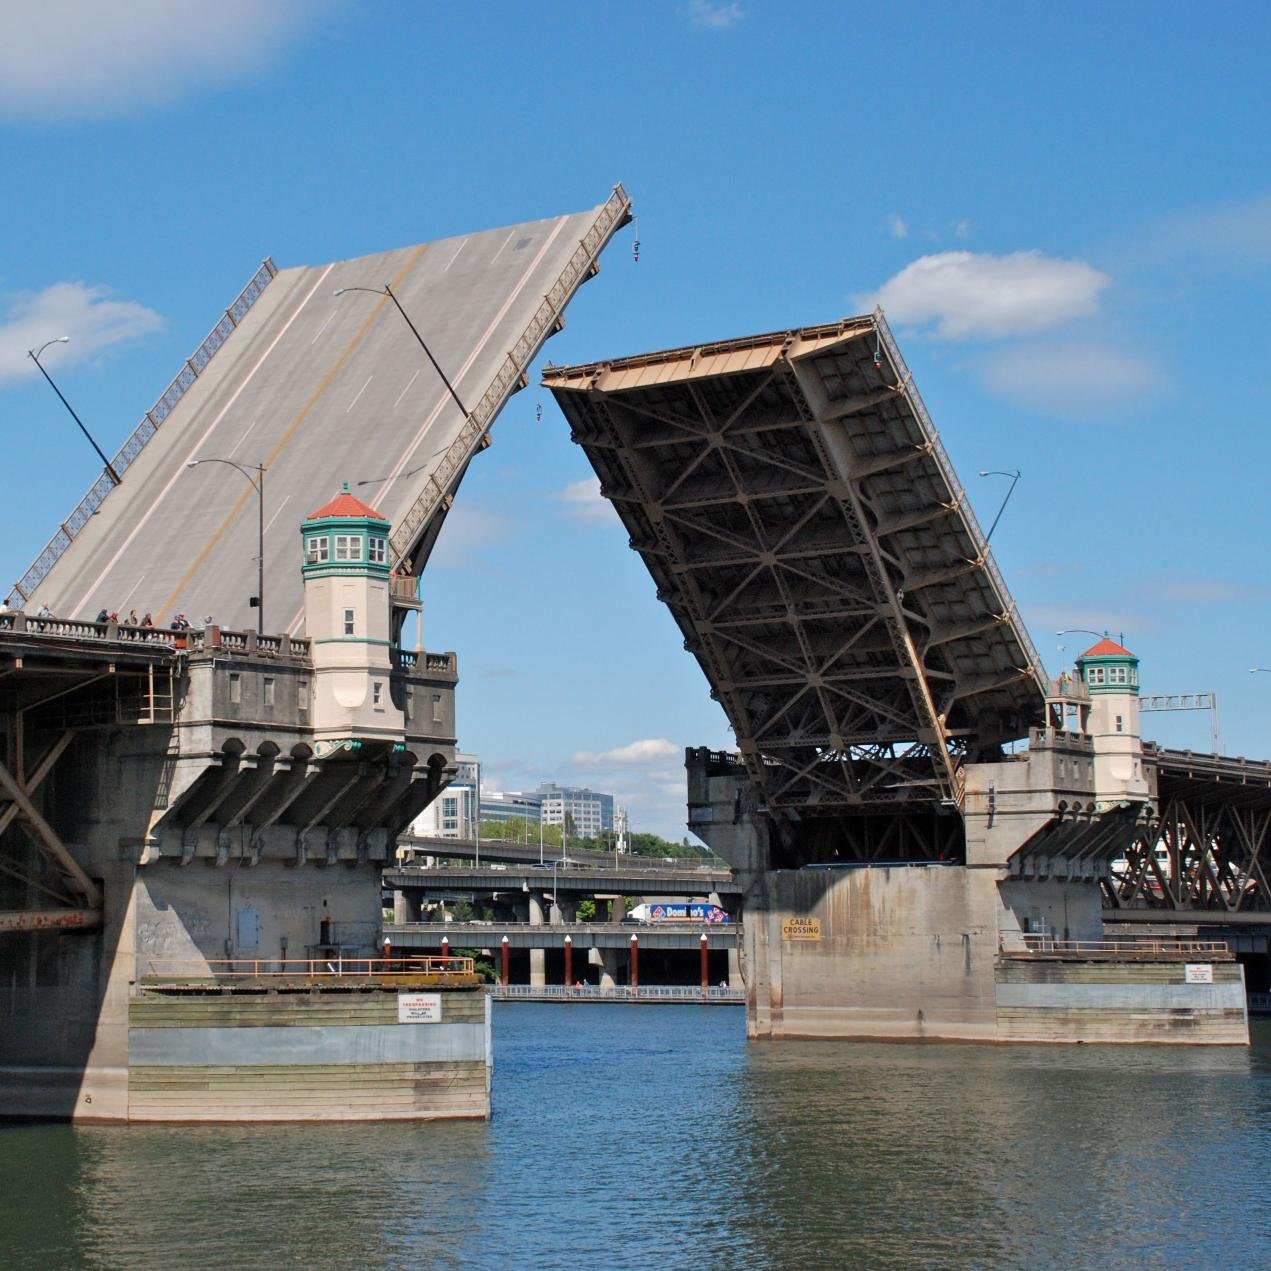 I'm one of the heaviest bascule bridges in the United States. Look it up.